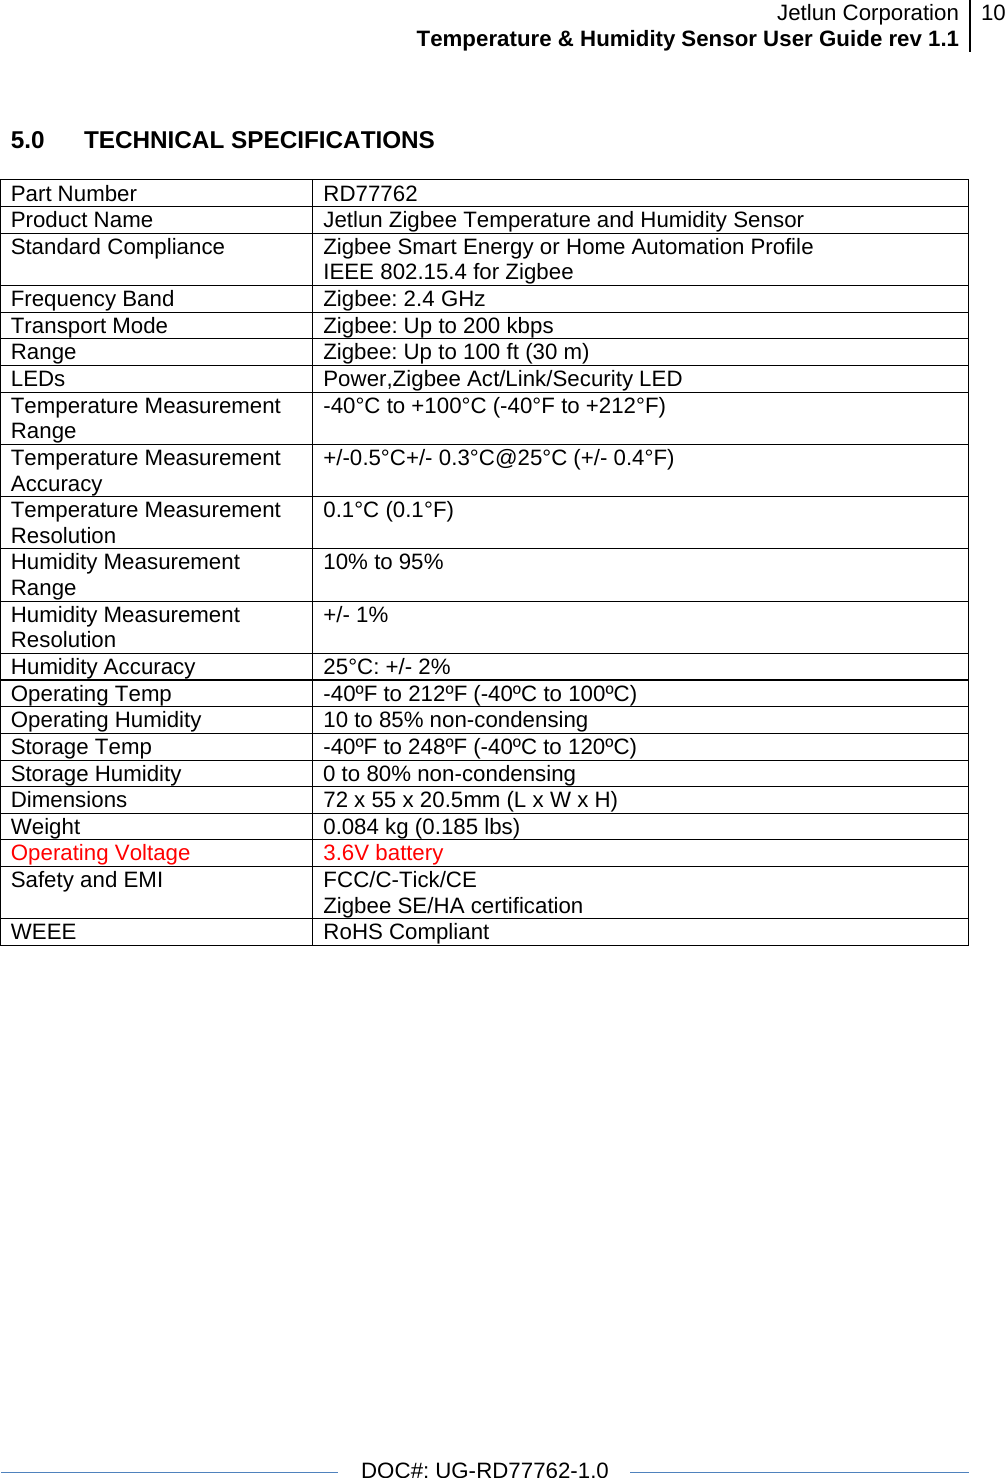 Jetlun CorporationTemperature &amp; Humidity Sensor User Guide rev 1.1 10   DOC#: UG-RD77762-1.0  5.0   TECHNICAL SPECIFICATIONS  Part Number  RD77762 Product Name  Jetlun Zigbee Temperature and Humidity Sensor Standard Compliance  Zigbee Smart Energy or Home Automation Profile IEEE 802.15.4 for Zigbee Frequency Band  Zigbee: 2.4 GHz Transport Mode   Zigbee: Up to 200 kbps Range  Zigbee: Up to 100 ft (30 m) LEDs  Power,Zigbee Act/Link/Security LED Temperature Measurement Range   -40°C to +100°C (-40°F to +212°F) Temperature Measurement Accuracy  +/-0.5°C+/- 0.3°C@25°C (+/- 0.4°F) Temperature Measurement Resolution  0.1°C (0.1°F) Humidity Measurement Range  10% to 95% Humidity Measurement Resolution  +/- 1% Humidity Accuracy  25°C: +/- 2% Operating Temp  -40ºF to 212ºF (-40ºC to 100ºC) Operating Humidity  10 to 85% non-condensing Storage Temp  -40ºF to 248ºF (-40ºC to 120ºC) Storage Humidity  0 to 80% non-condensing Dimensions  72 x 55 x 20.5mm (L x W x H) Weight  0.084 kg (0.185 lbs) Operating Voltage  3.6V battery Safety and EMI  FCC/C-Tick/CE Zigbee SE/HA certification WEEE RoHS Compliant 